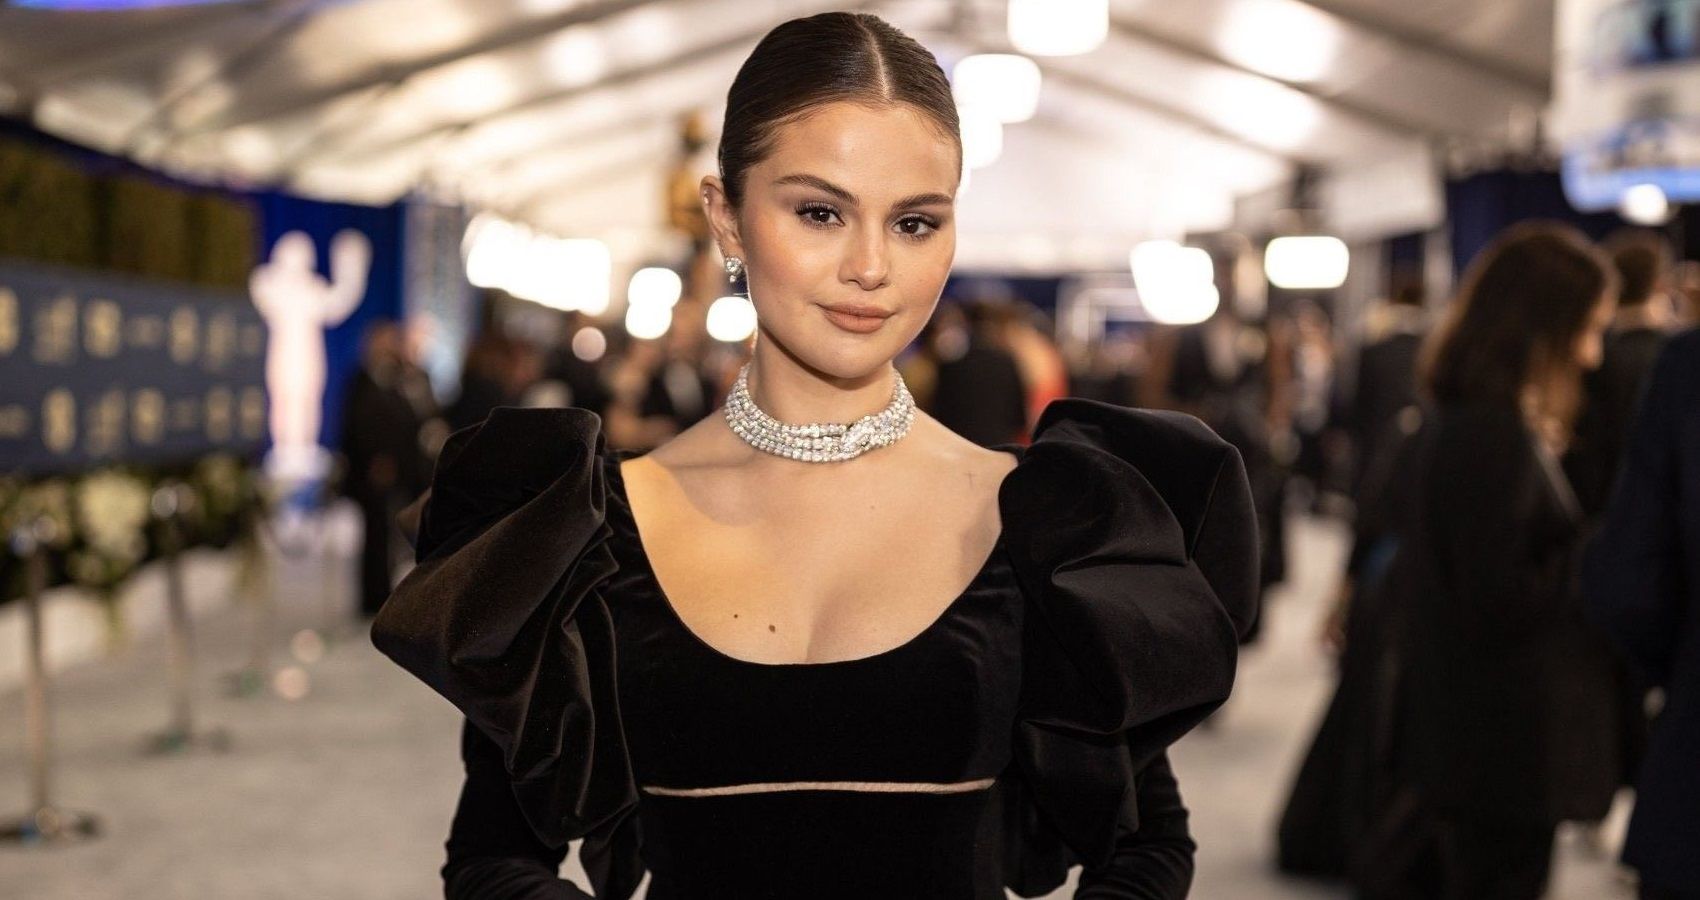 Selena Gomez looking very confident on the Red Carpet